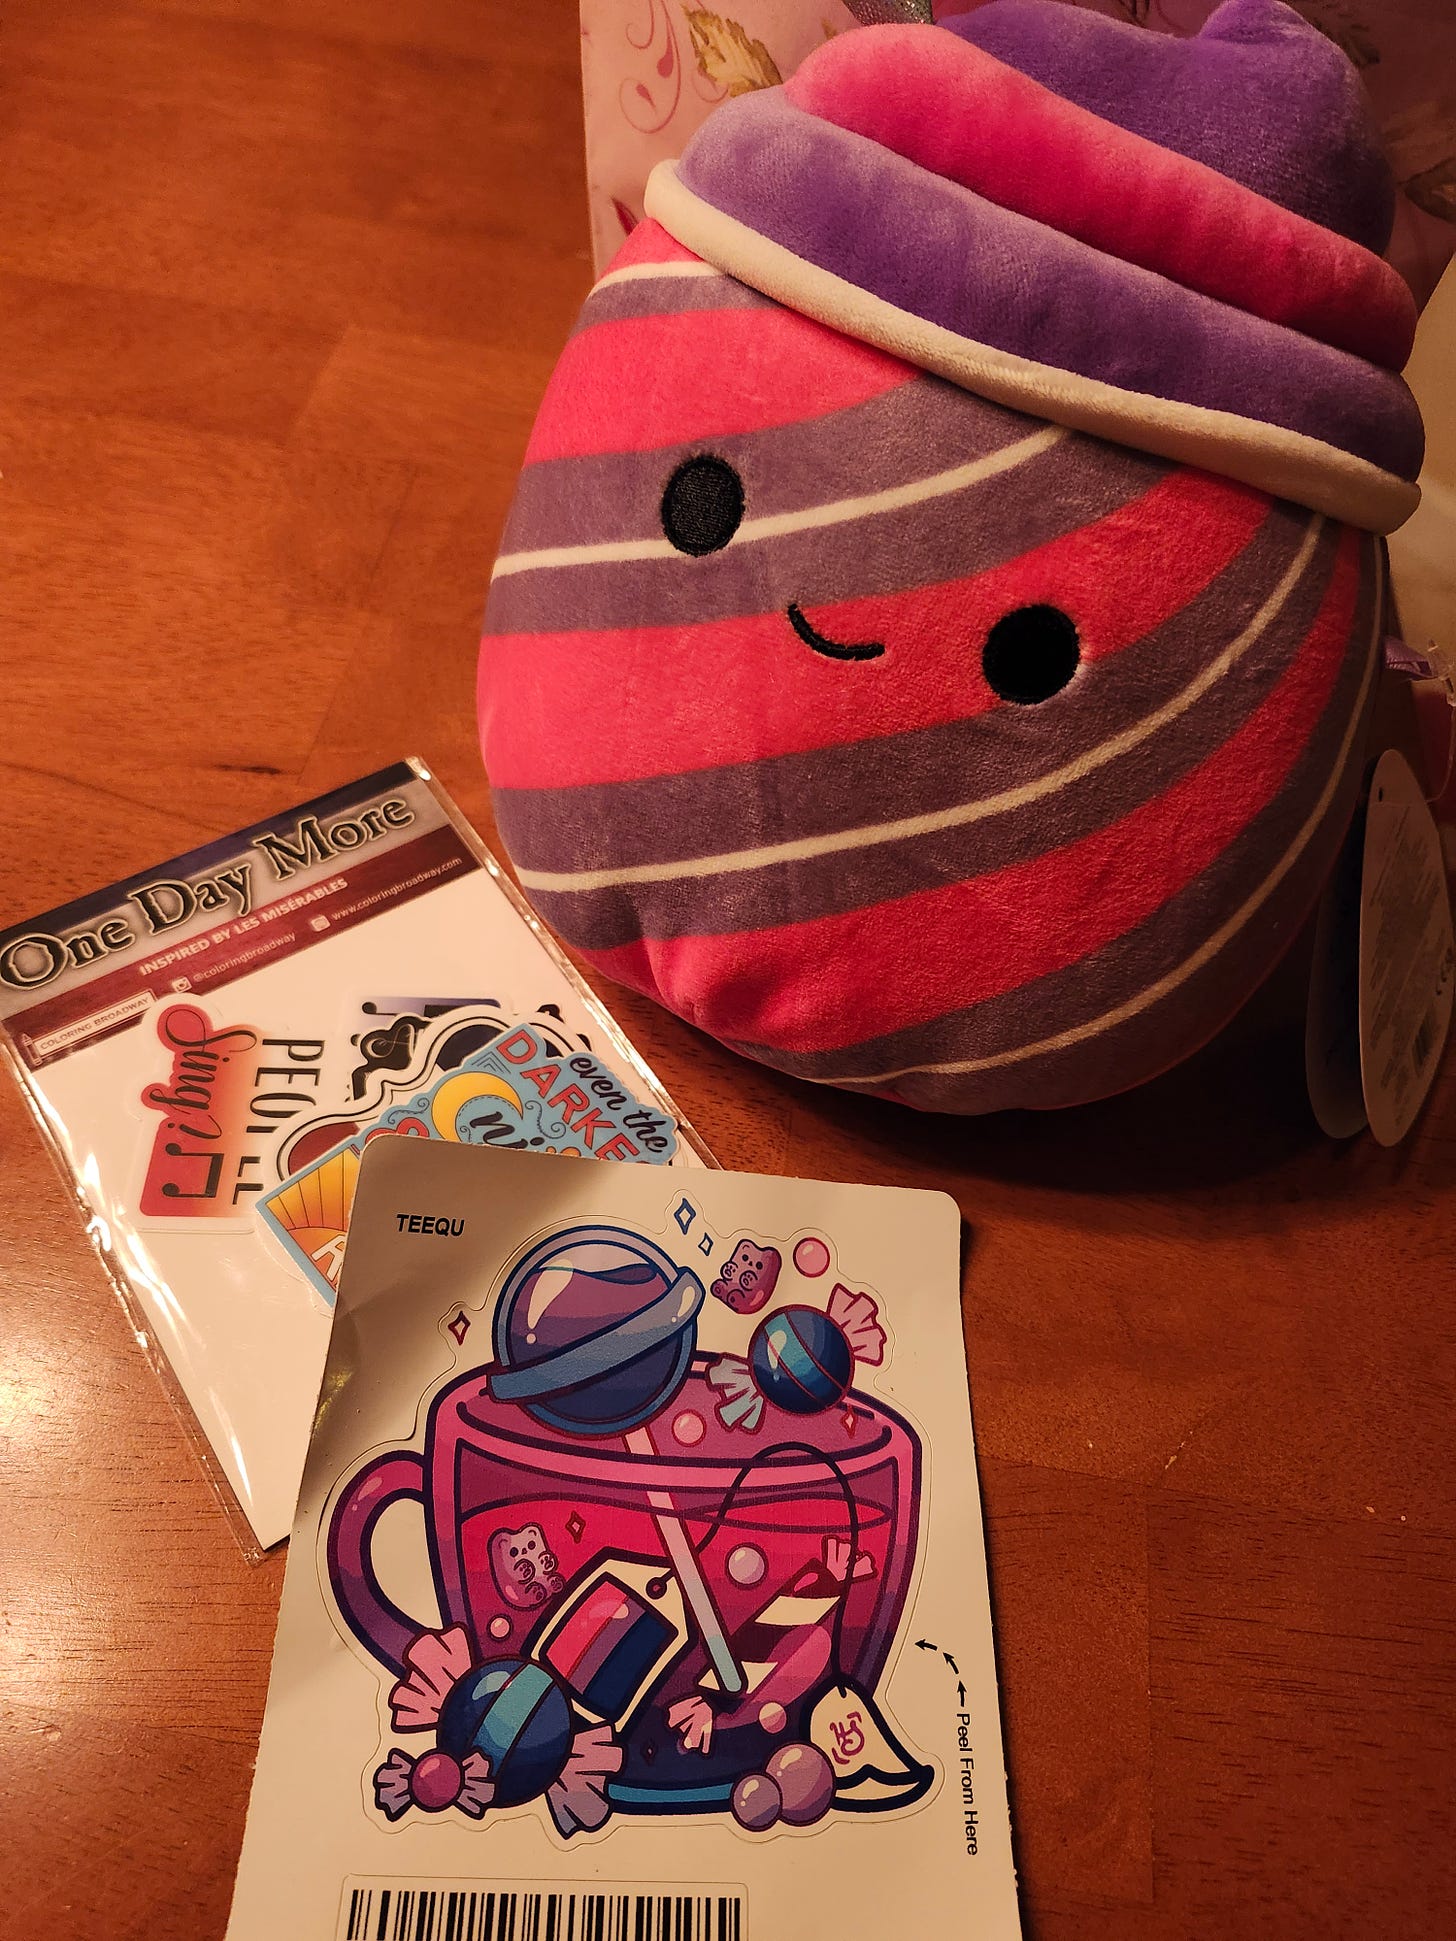 A mini bisexual slushie squishmallow and various Les Mis and bisexual stickers